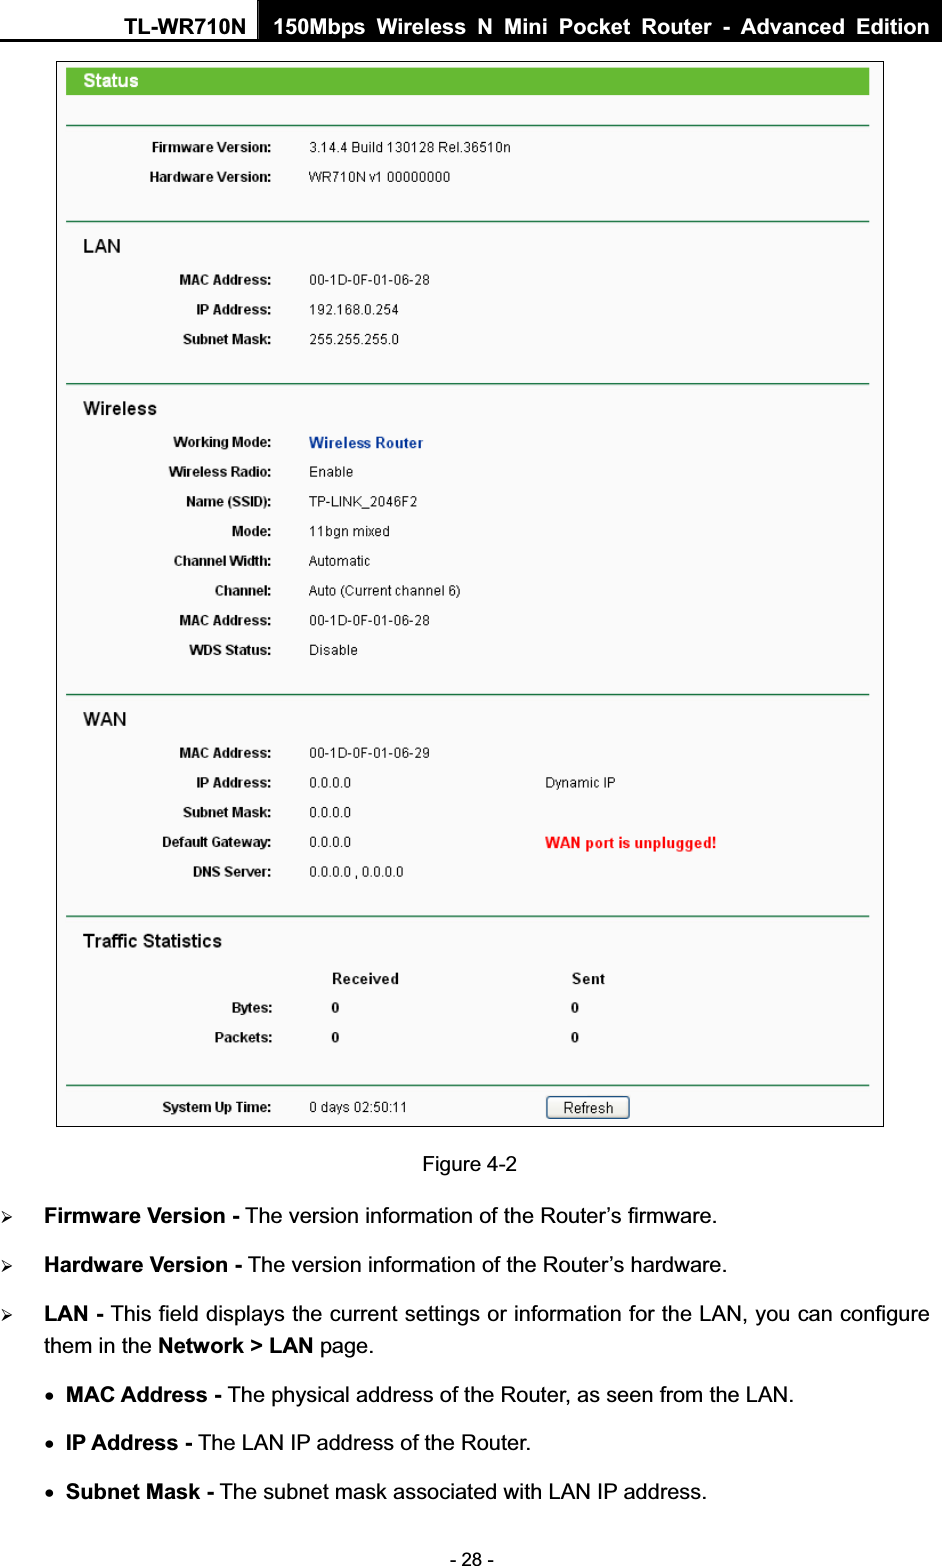 TL-WR710N  150Mbps Wireless N Mini Pocket Router - Advanced Edition- 28 - Figure 4-2 ¾Firmware Version - The version information of the Router’s firmware. ¾Hardware Version - The version information of the Router’s hardware. ¾LAN - This field displays the current settings or information for the LAN, you can configure them in the Network &gt; LAN page.   xMAC Address - The physical address of the Router, as seen from the LAN. xIP Address - The LAN IP address of the Router. xSubnet Mask - The subnet mask associated with LAN IP address. 